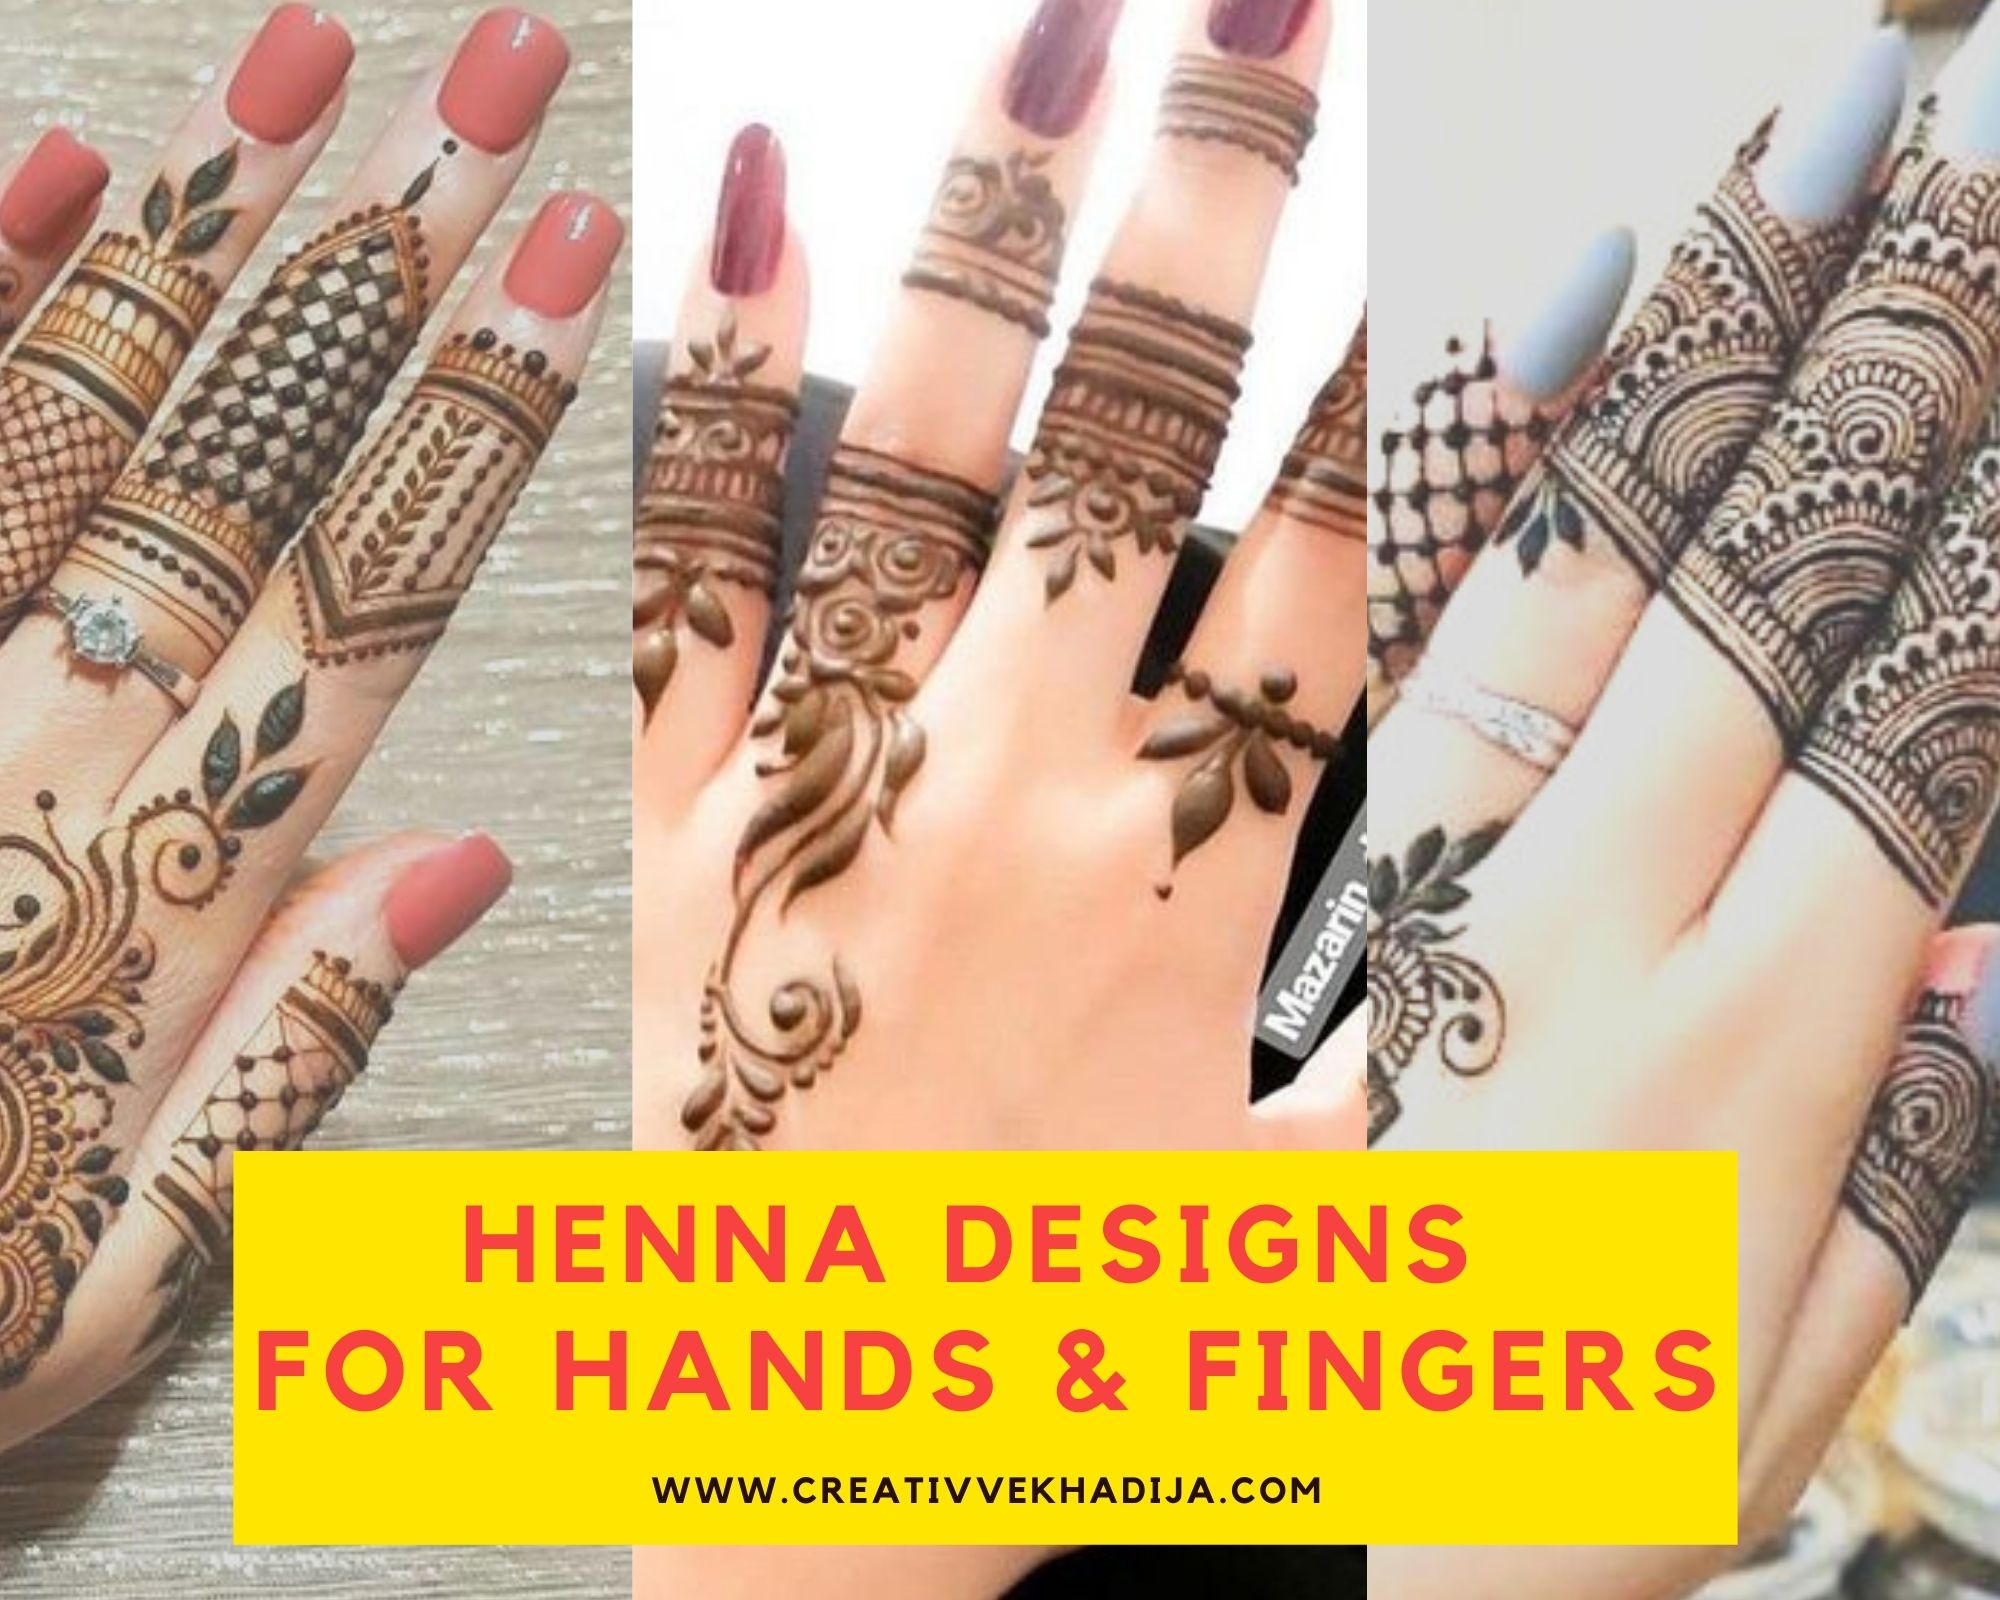 Designs henna What Does